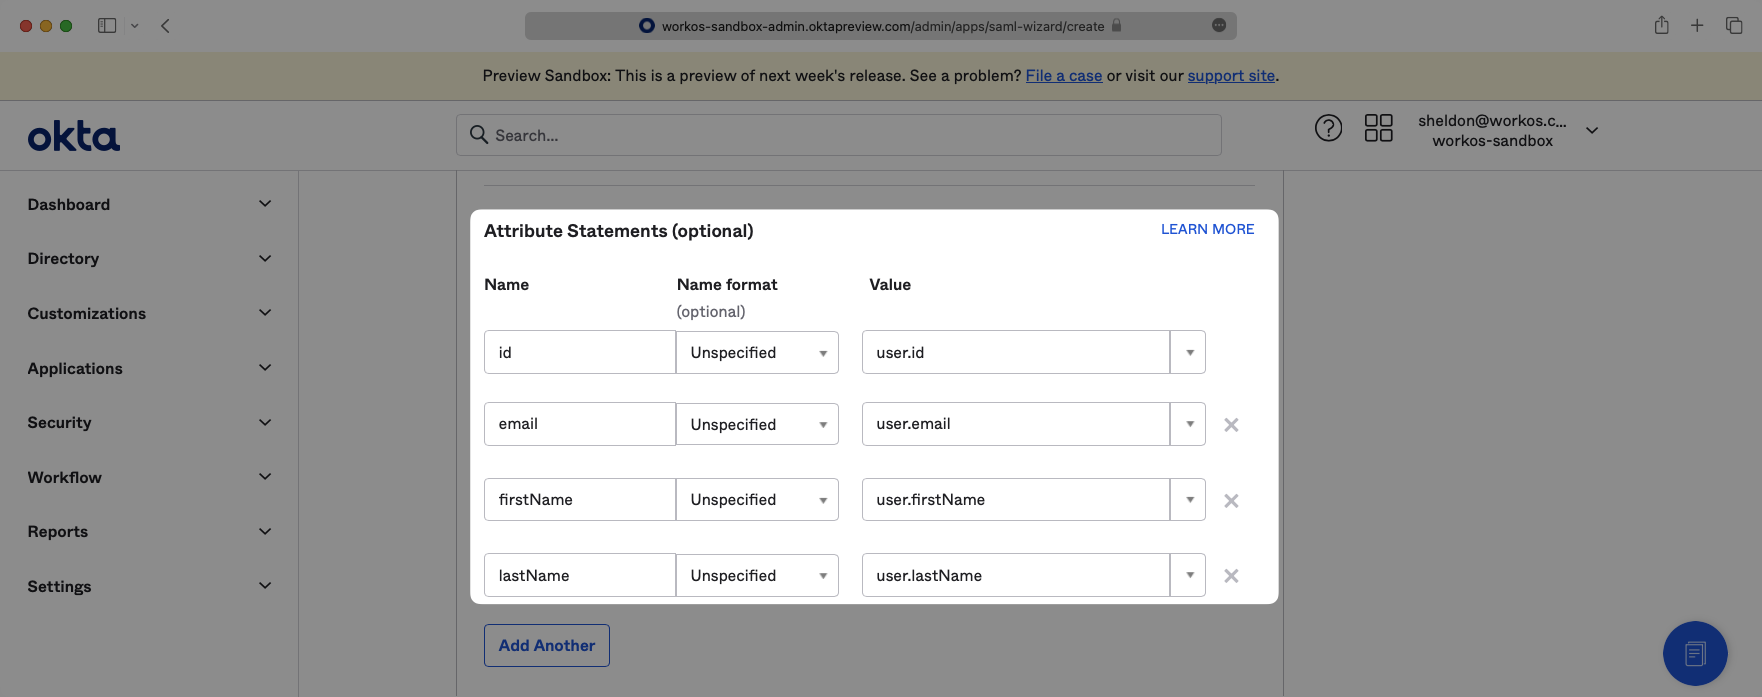 A screenshot showing the "Attribute Statements" configuration in the Okta Dashboard.